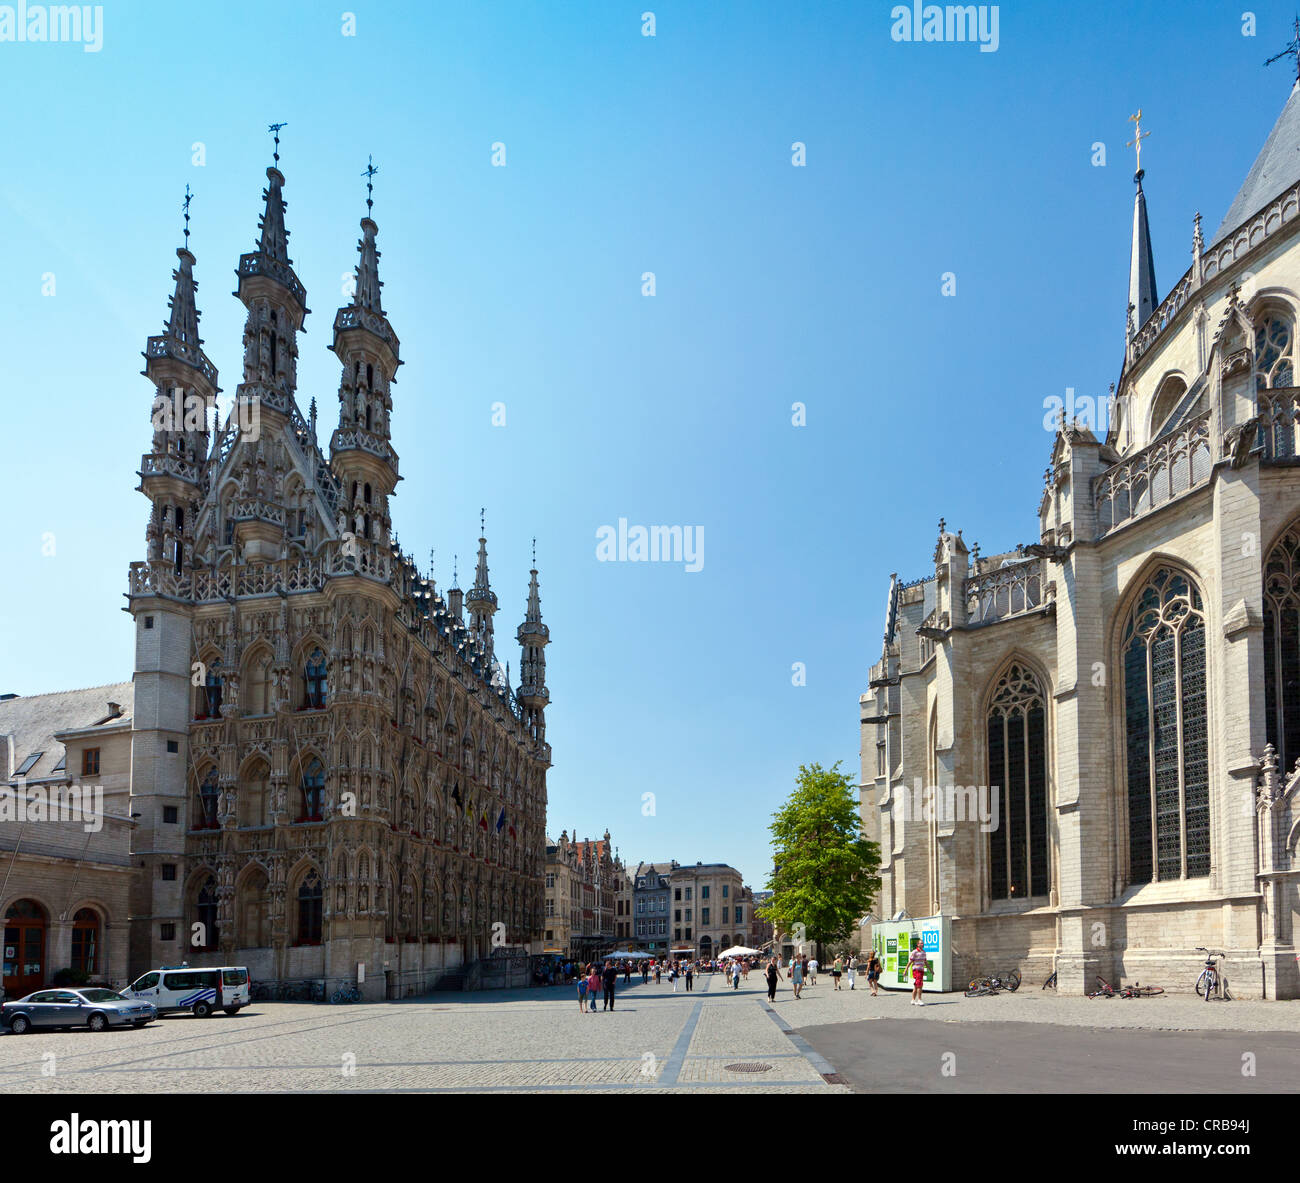 Church of St Pieter, Sint-Pieterskerk church and the Gothic town hall on Grote Markt square, street cafes, Leuven, Belgium Stock Photo